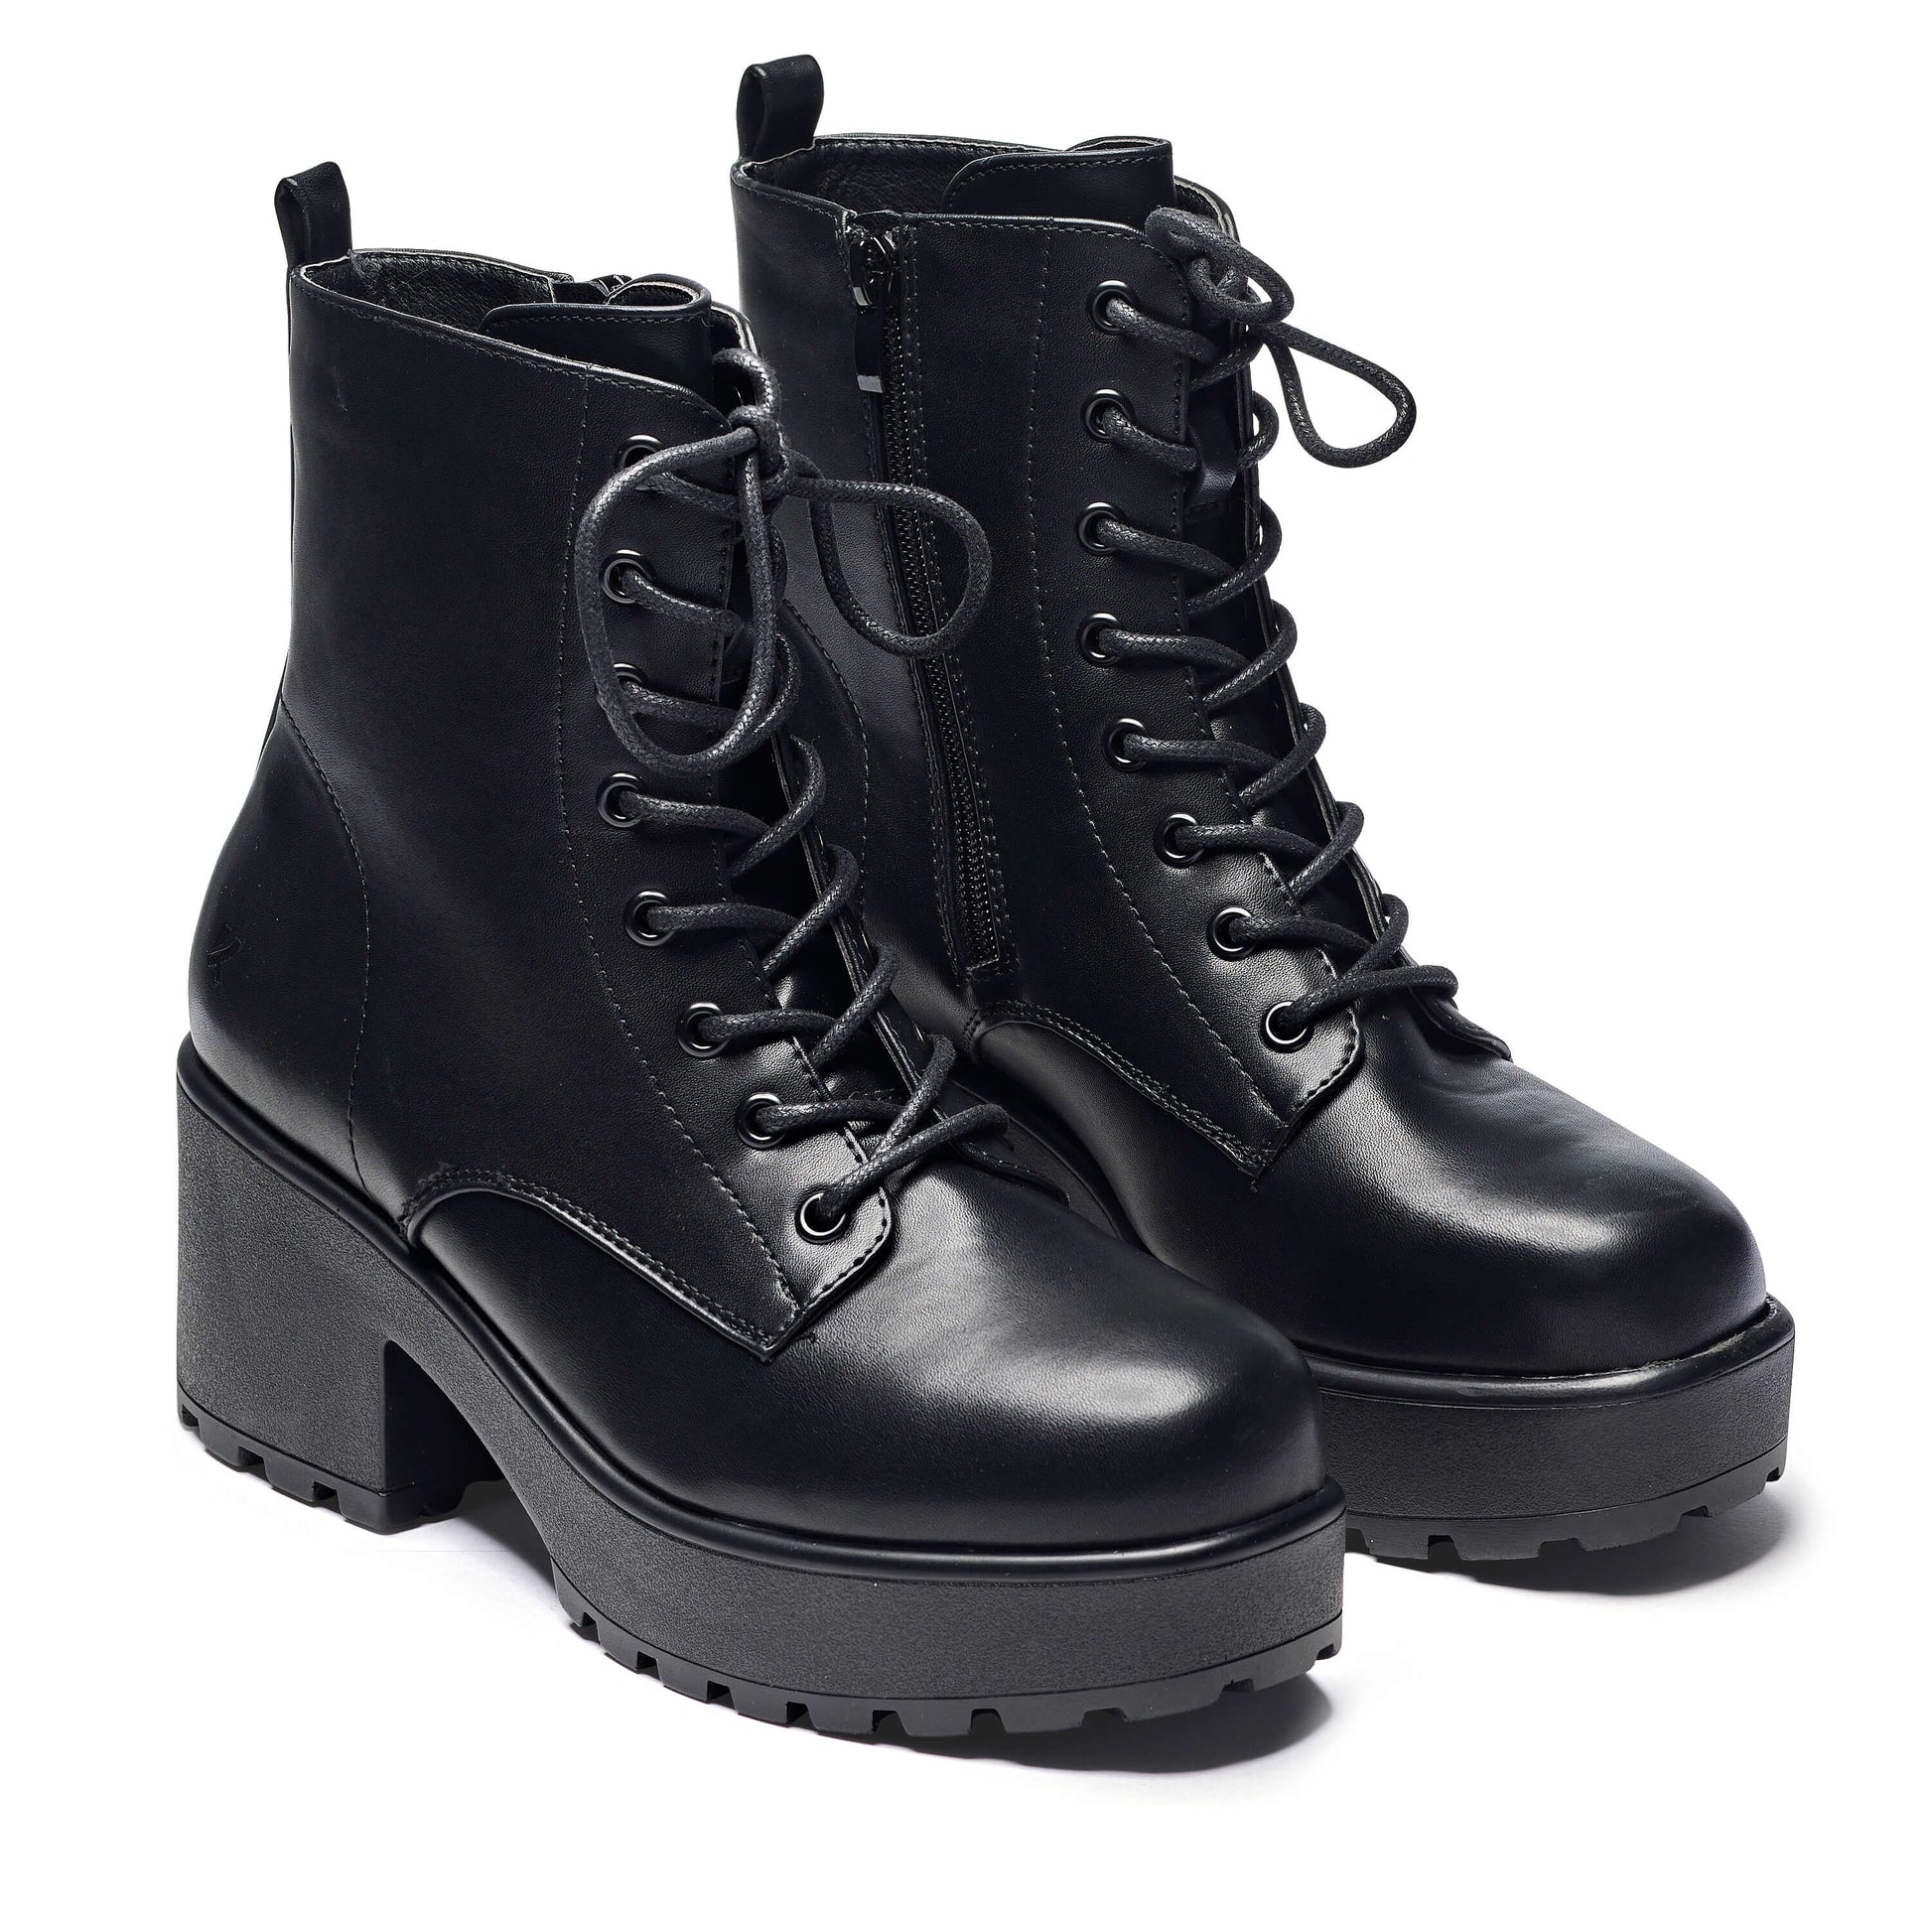 GIN Platform Military Boots - Ankle Boots - KOI Footwear - Black - Three-Quarter Model View